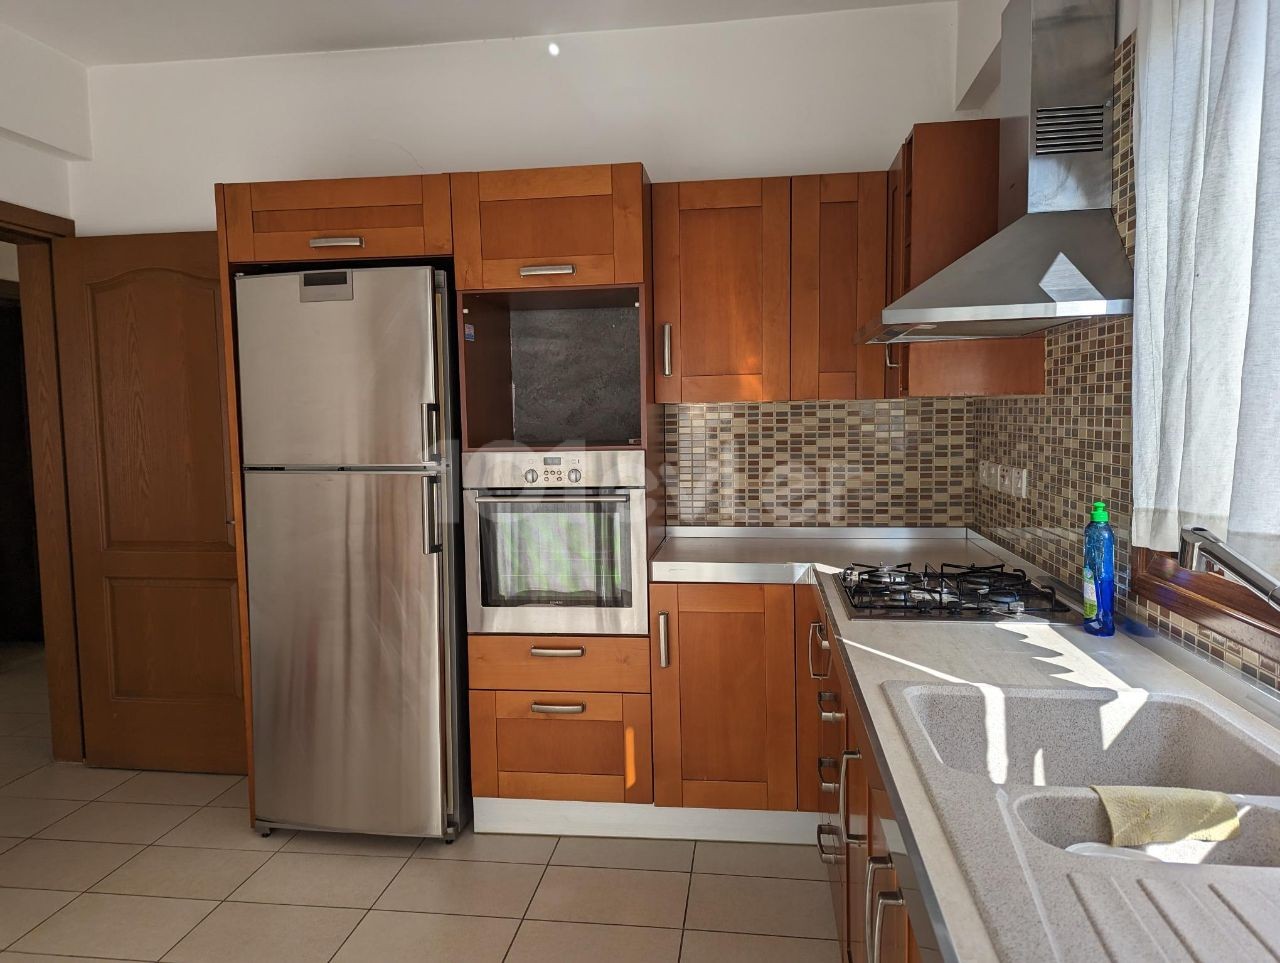 IN NICOSIA ORTAKÖY, TURKISH KOÇANLI, 3+1, GÖNYELİ CLOSE TO THE GREAT CIRCLE AND IN VERY GOOD LOCATION, WITH A TOTAL OF 3 FLOOR AND 5 FLATS, WITH A TOTAL OF 3 FLOORS AND 5 FLATS, APARTMENT APARTMENT, 7 DATING IN PATHOUSE, APARTMENT, BENTHOUSE BENT, AT THE UPPER FLOOR OF 7 DA USE FLAT